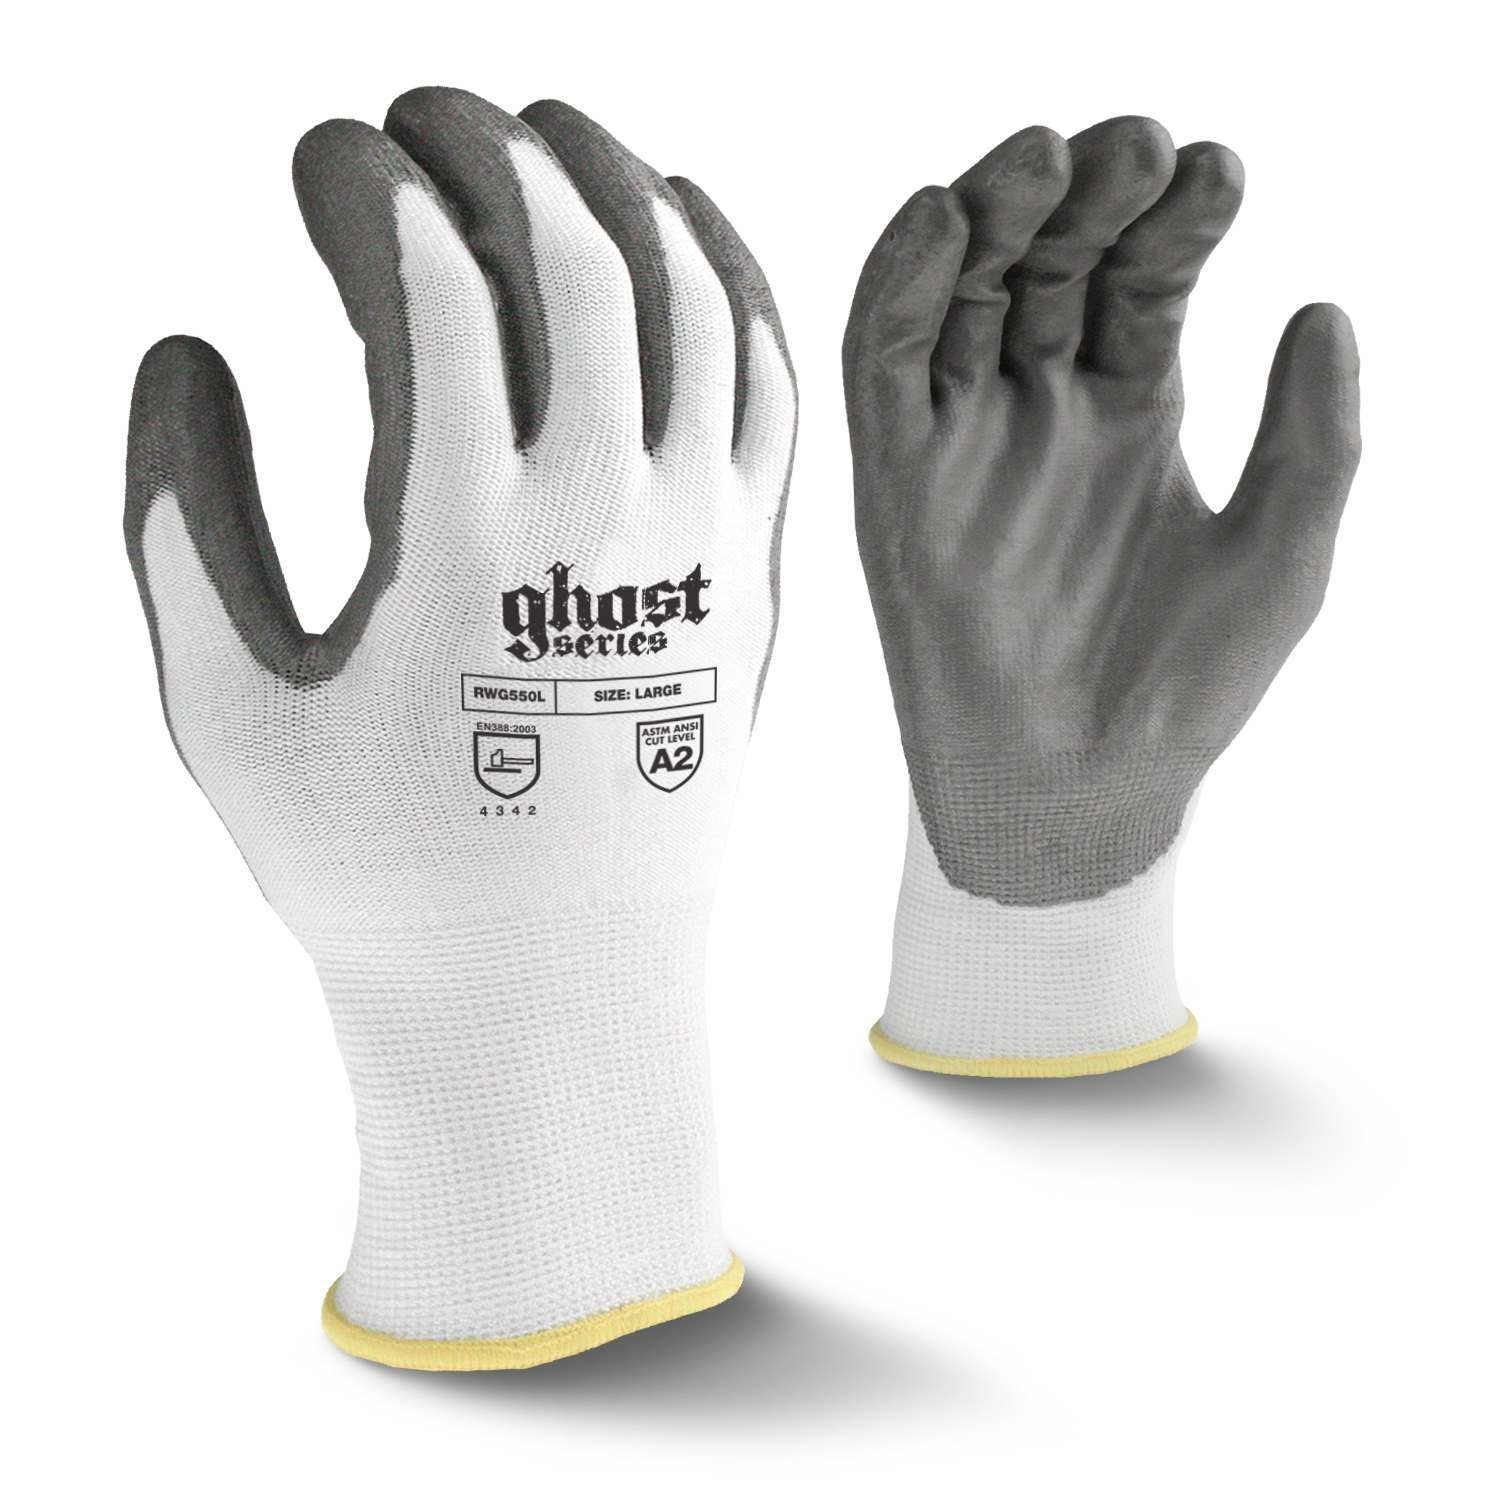 Series Cut Protection Level 3 Work Glove Radians RWG550 Ghost 